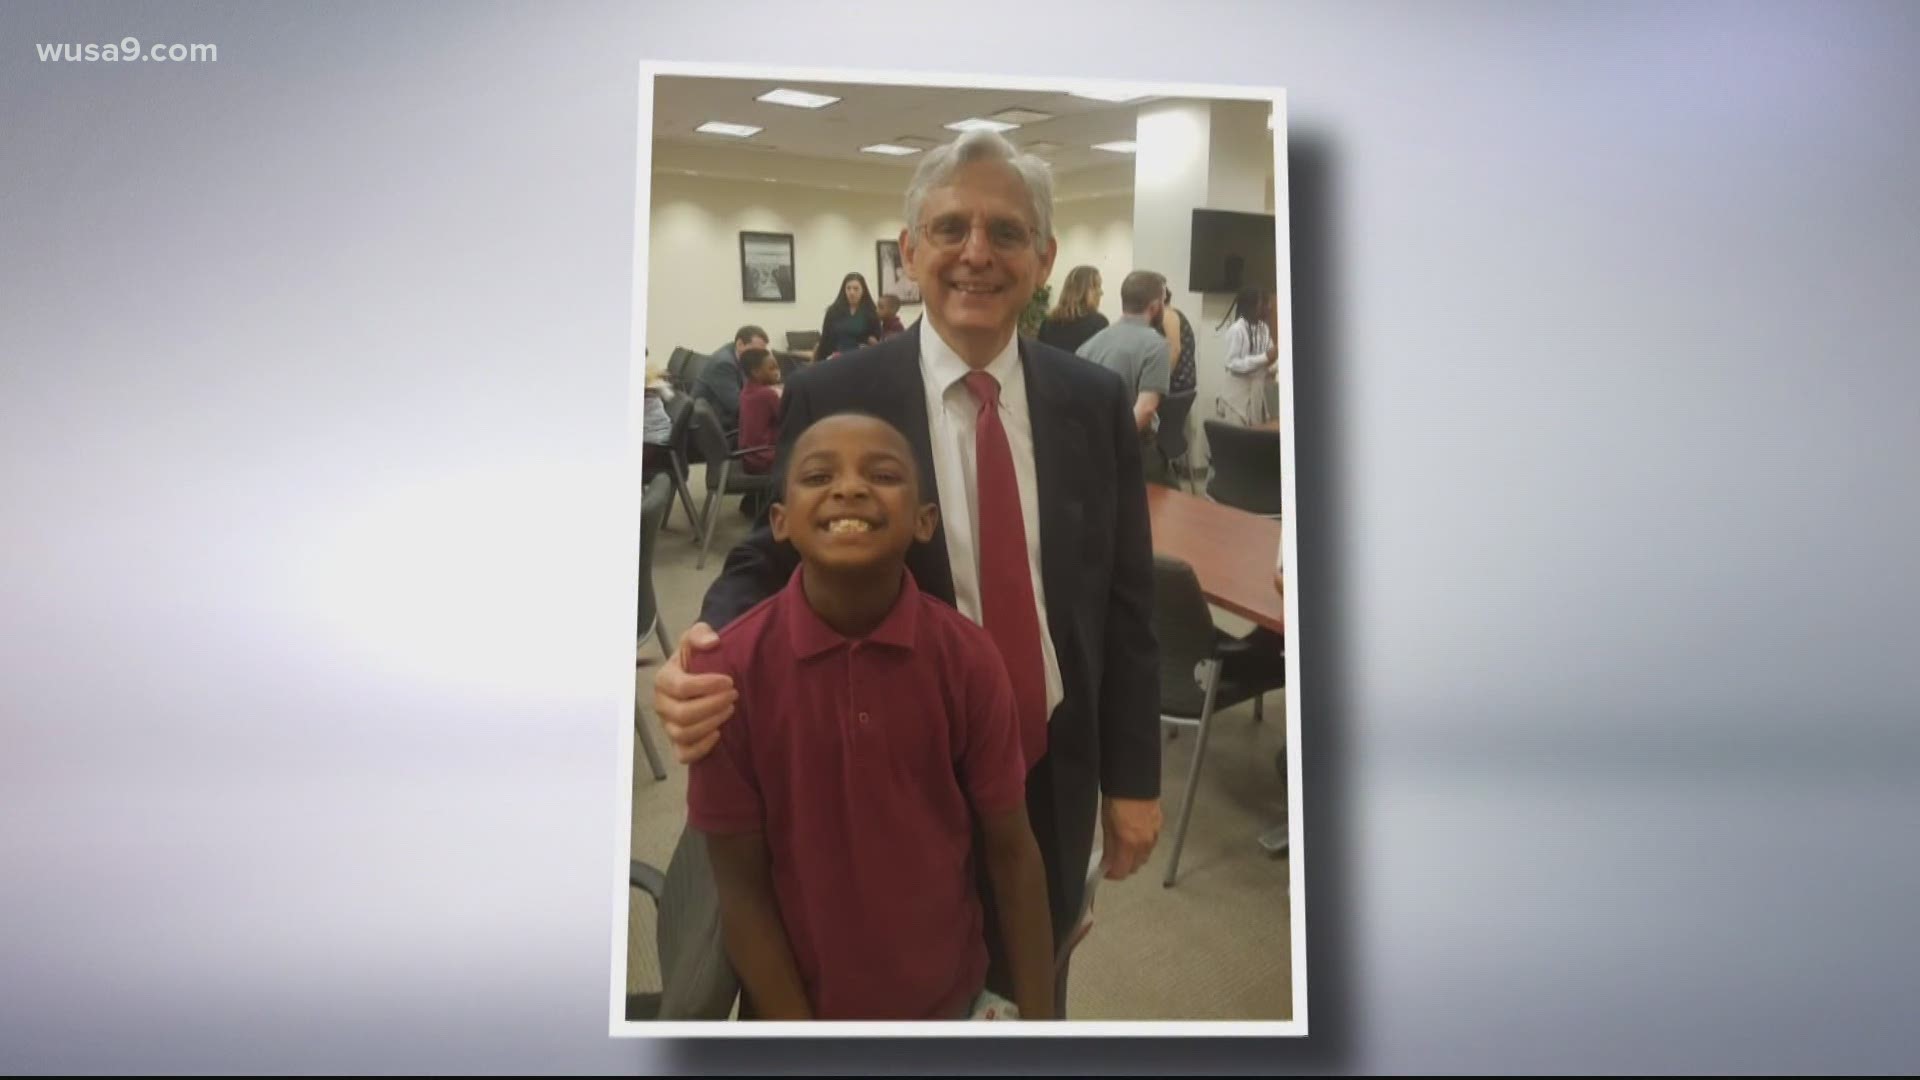 "It goes to show the character of the man," says a D.C. mom whose children have gone from struggling to honor roll since Judge Garland started tutoring them.